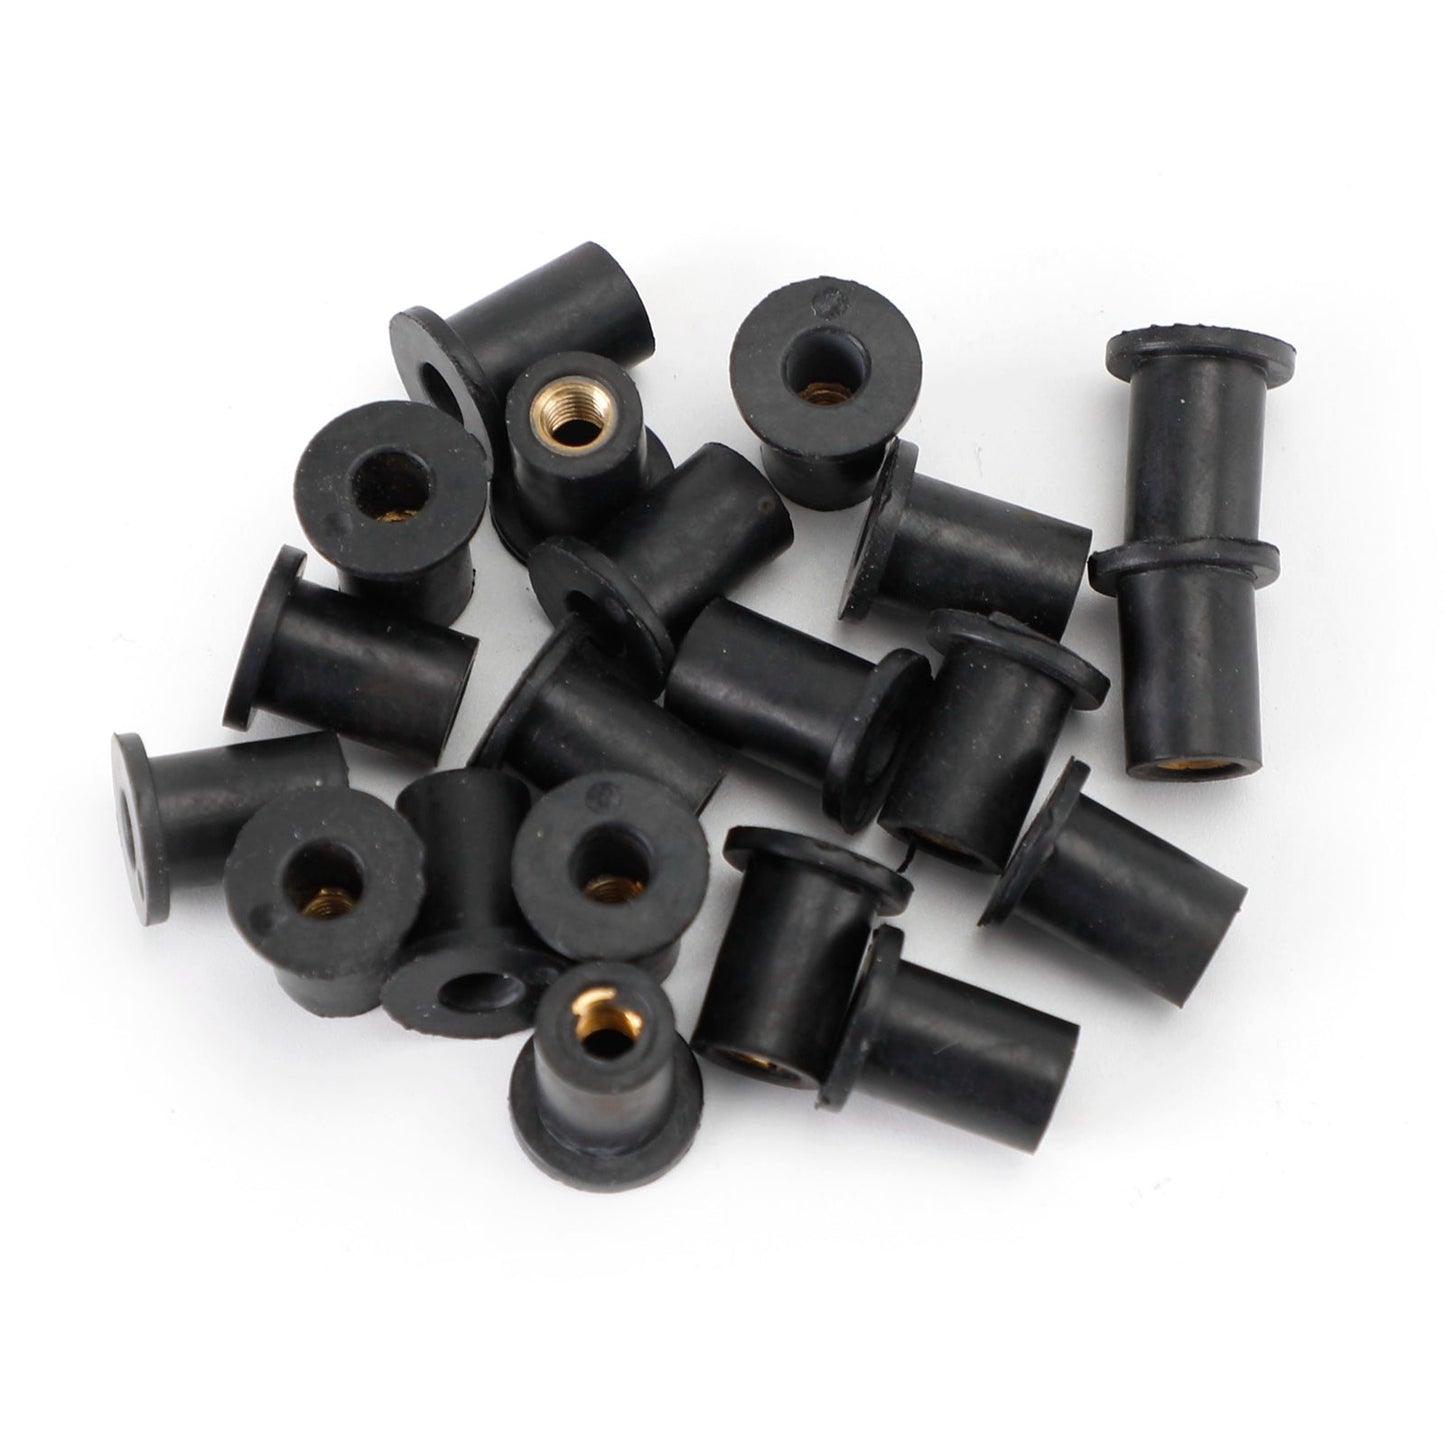 M4 Rubber Well Nuts Wellnuts for Fairing & Screen Fixing Pack of 20 - 8mm Hole